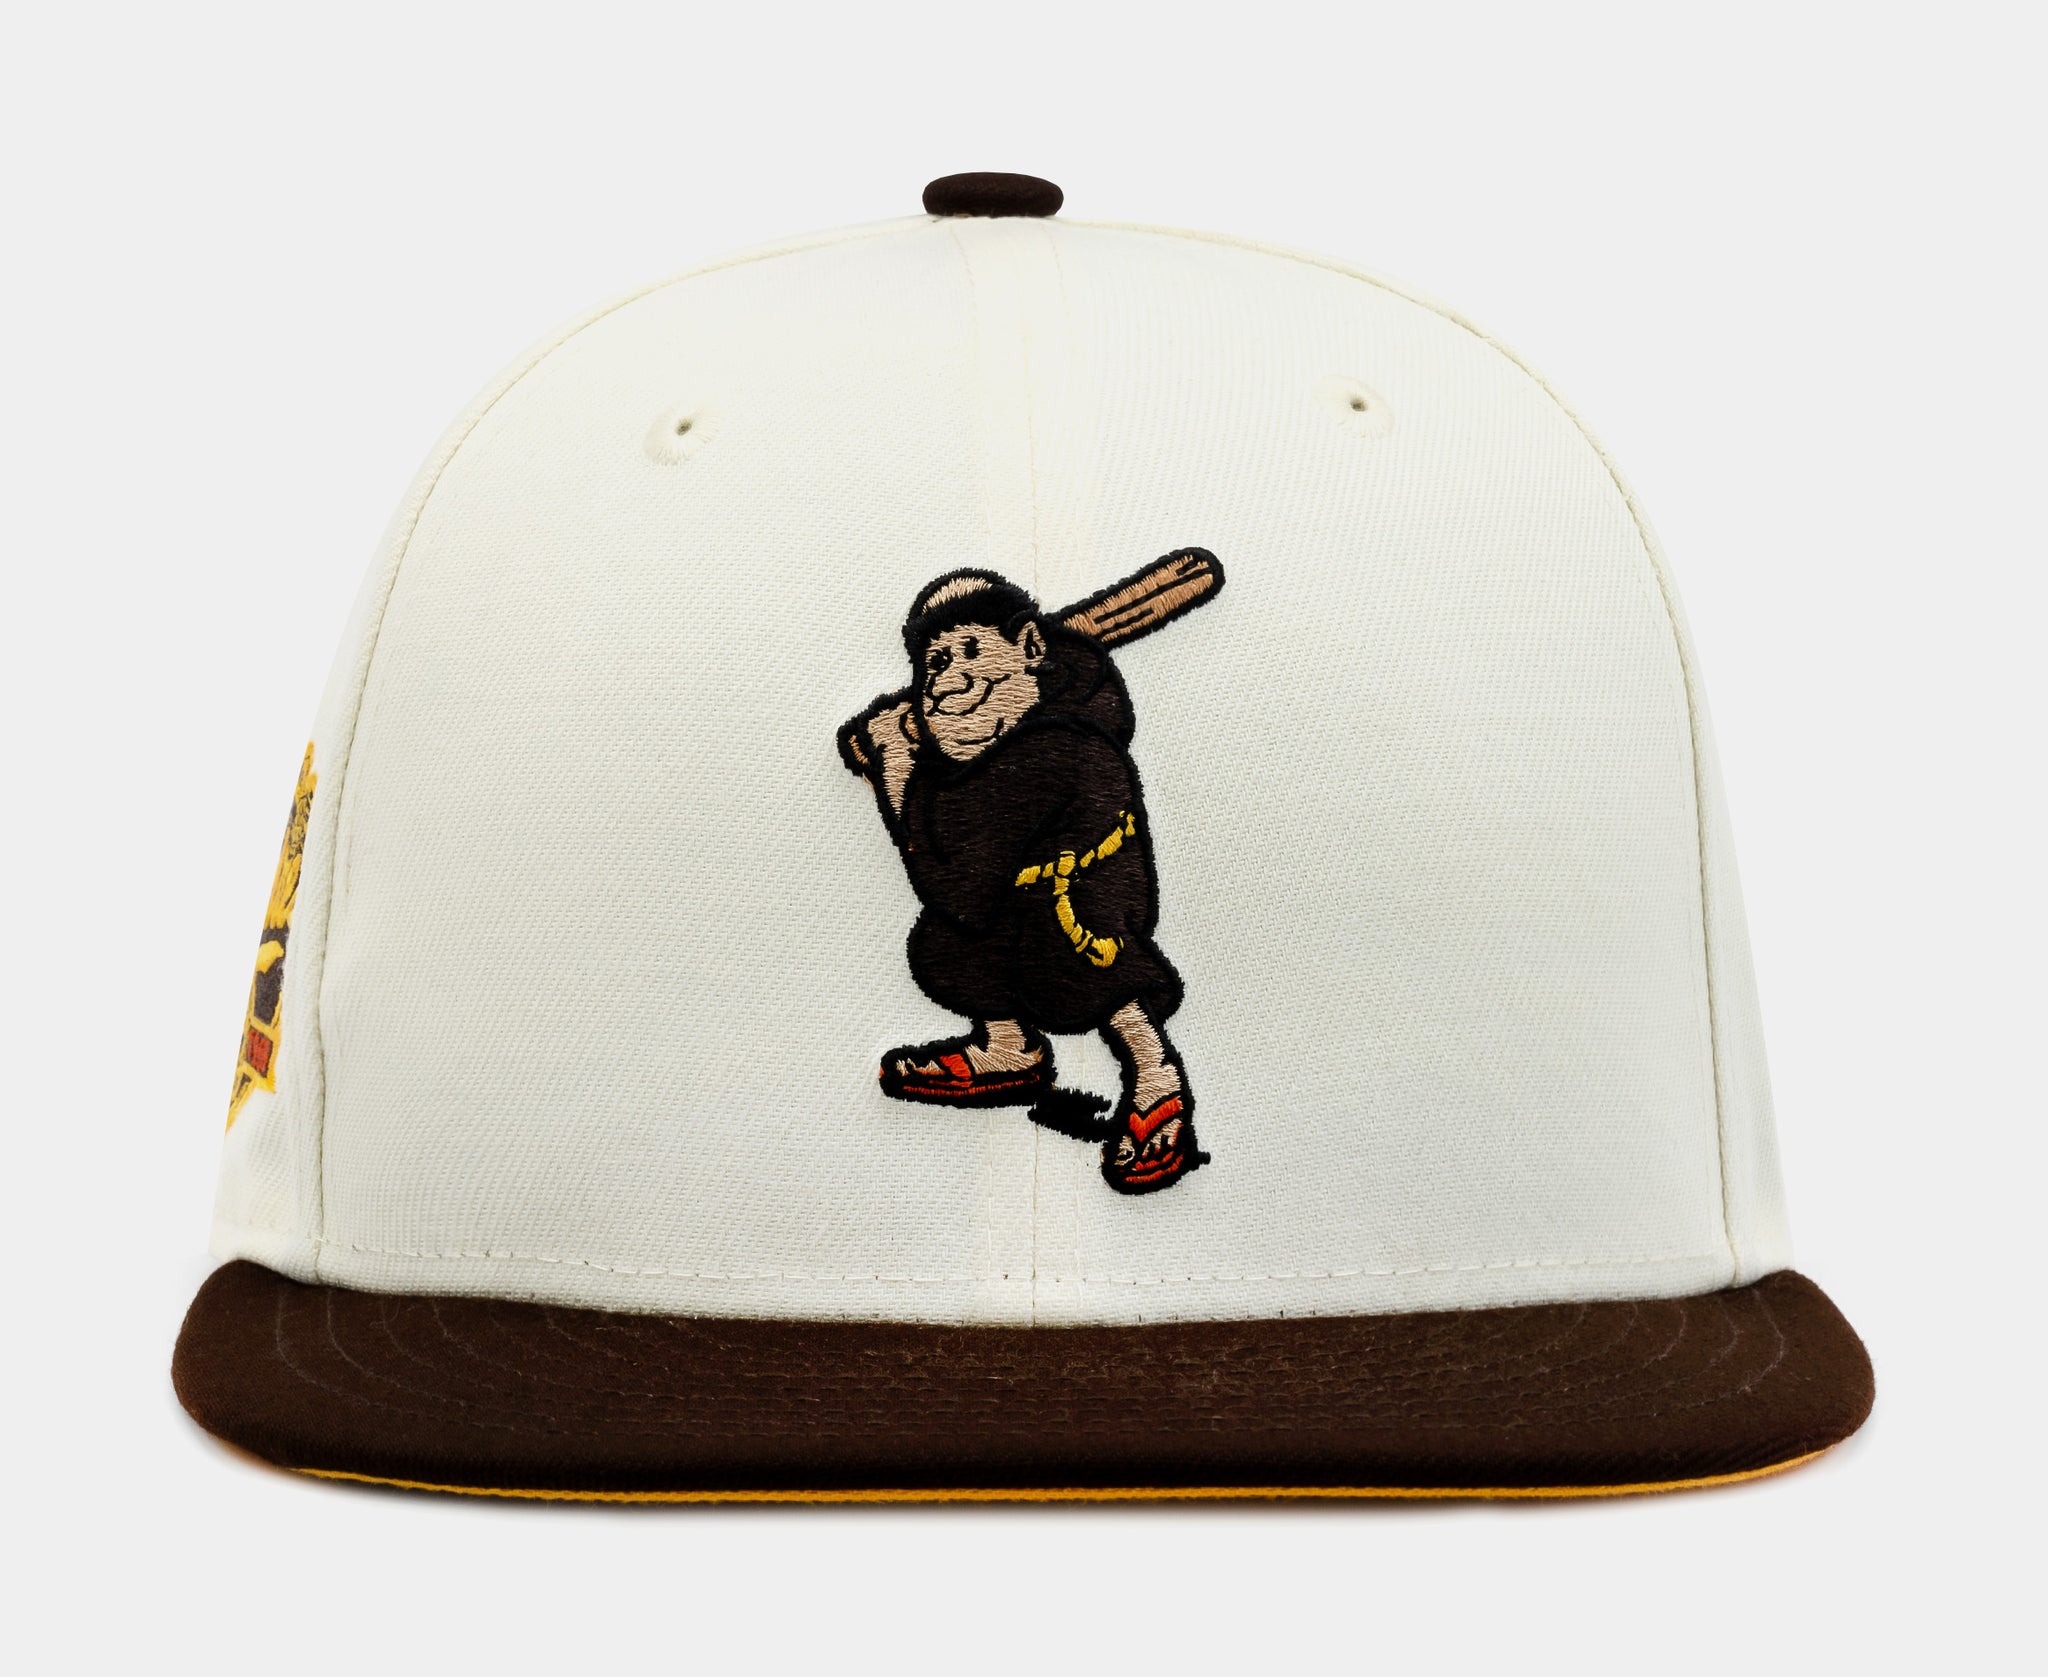 59Fifty New Era San Diego Padres Hat Brown Yellow 7 1/4